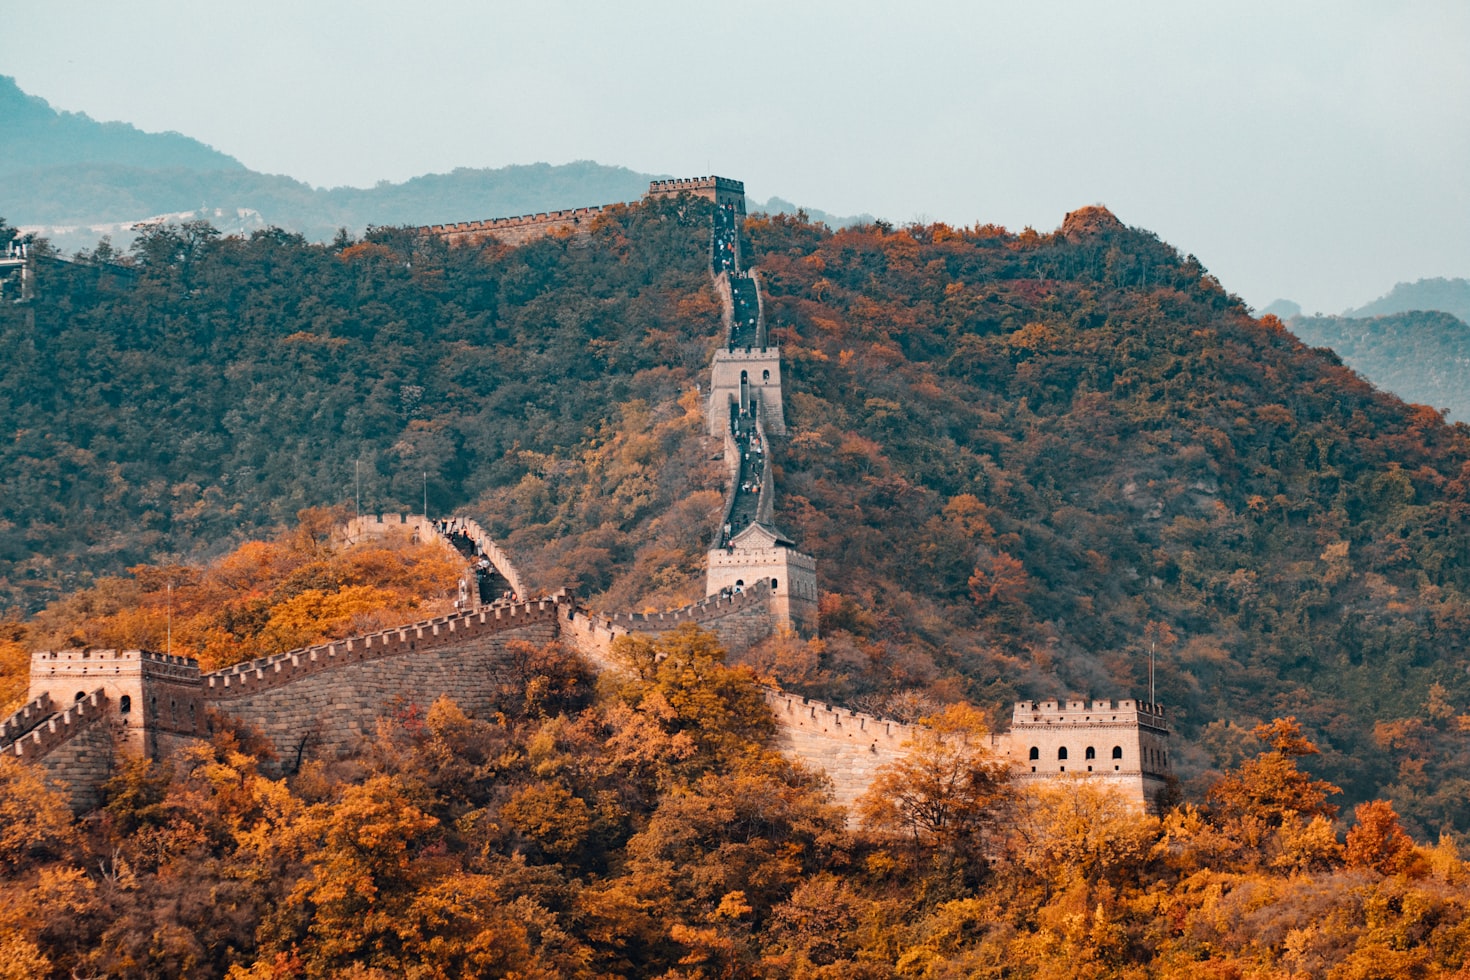 The Great Wall of China is not a single continuous wall